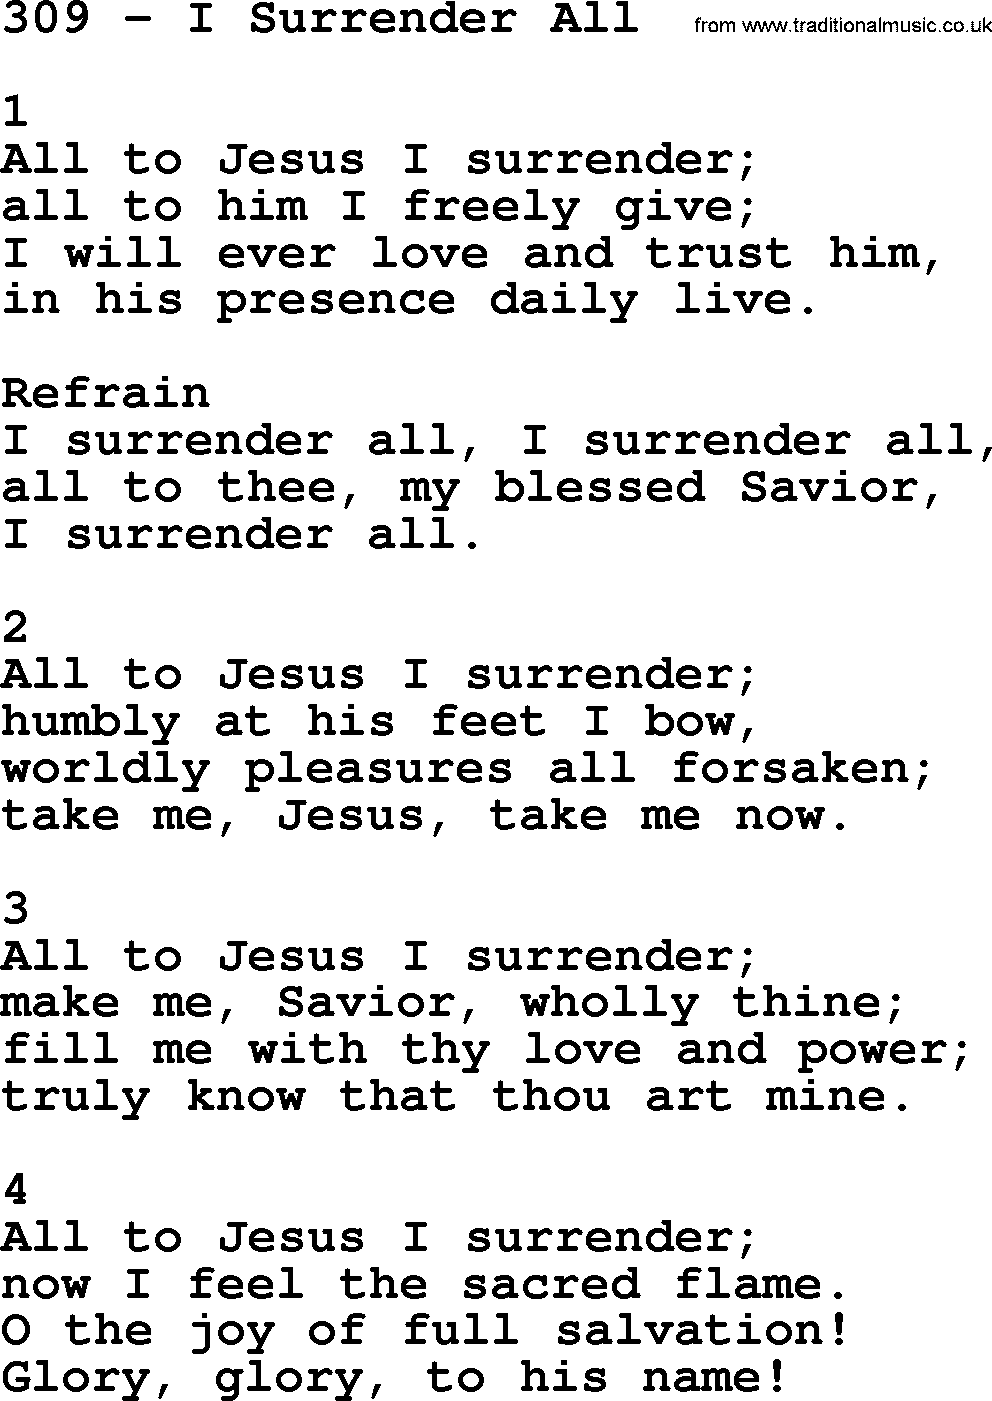 Complete Adventis Hymnal, title: 309-I Surrender All, with lyrics, midi, mp3, powerpoints(PPT) and PDF,